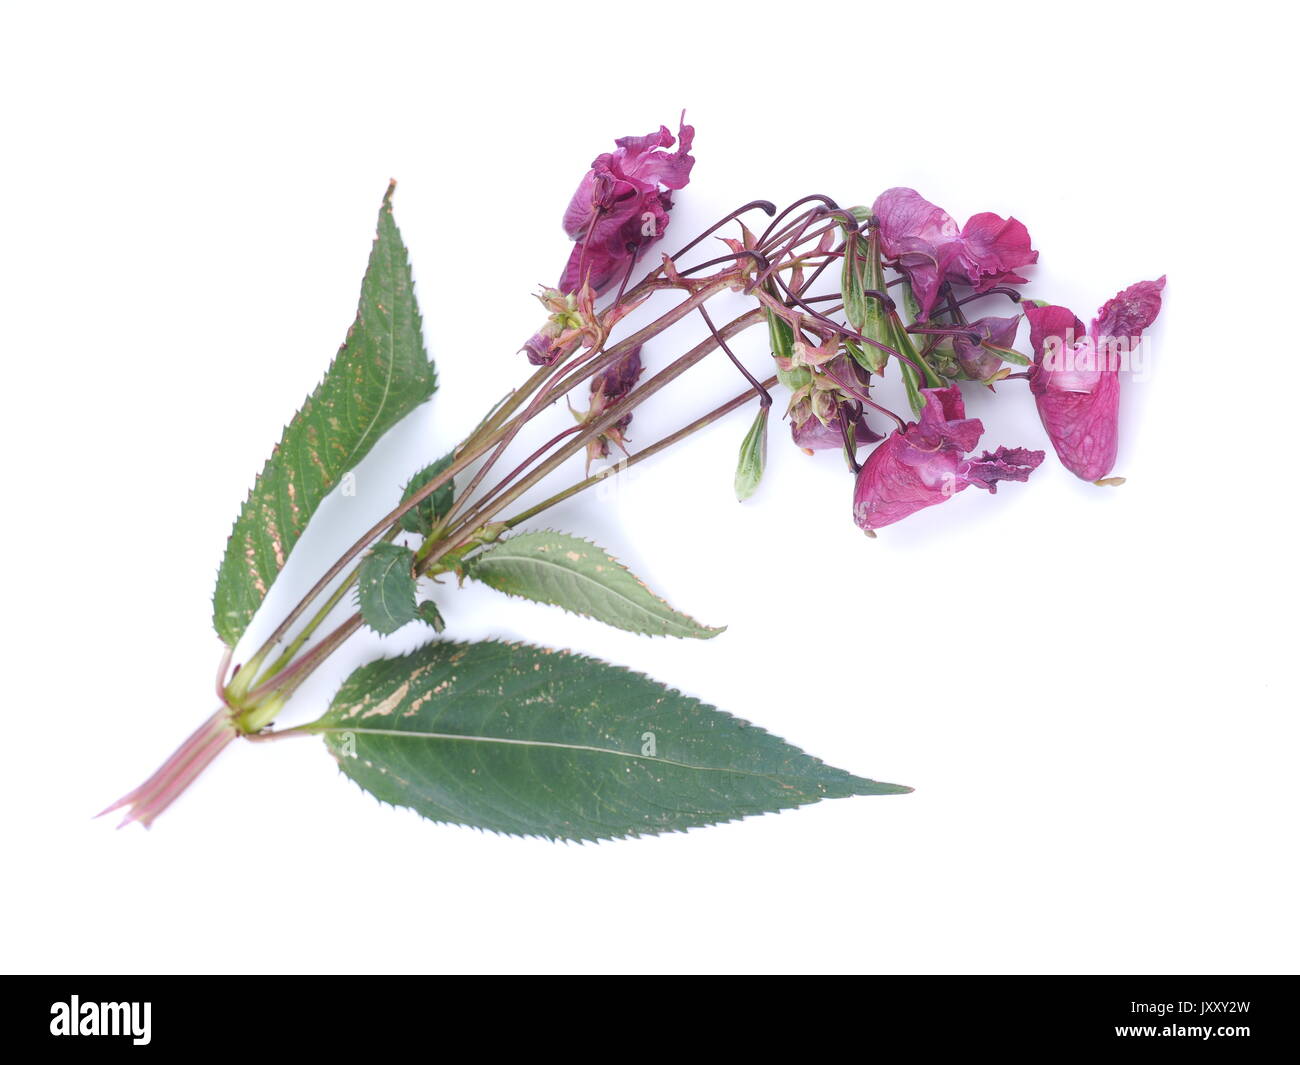 Balsam flowers on white background Stock Photo